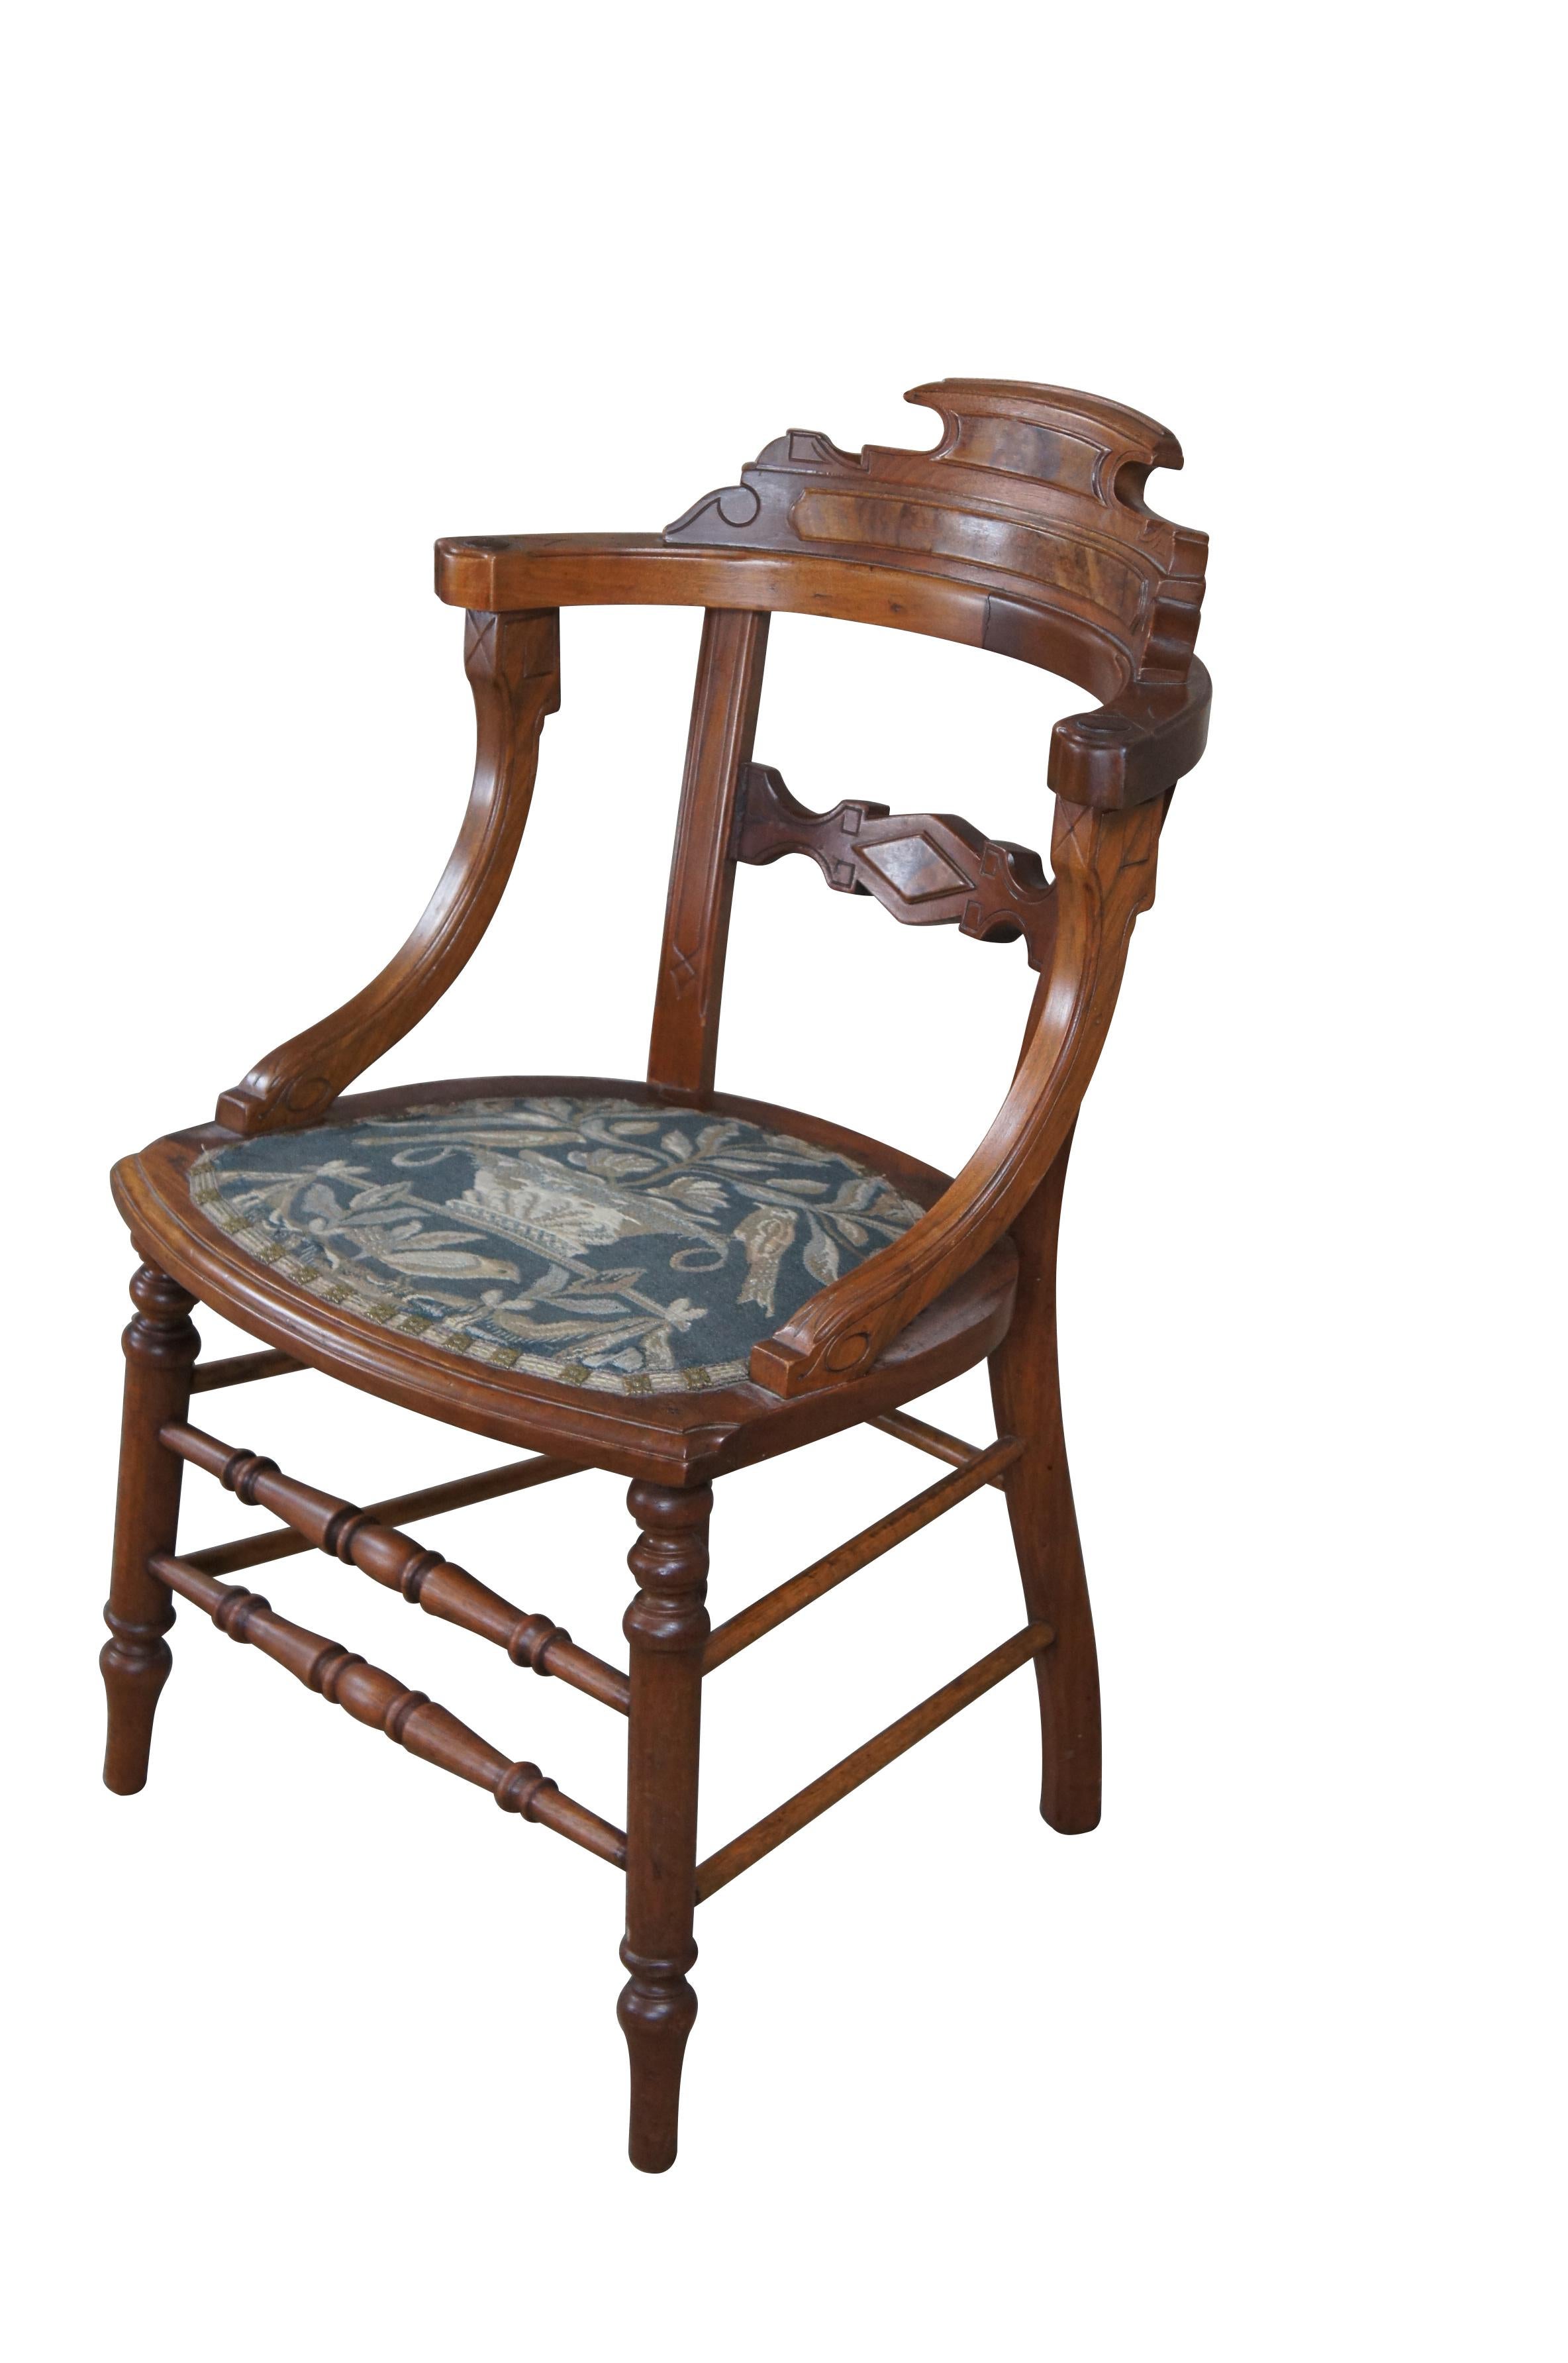 Antique Victorian Renaissance Revival Walnut Burl Side Chair Embroidered Seat In Good Condition For Sale In Dayton, OH